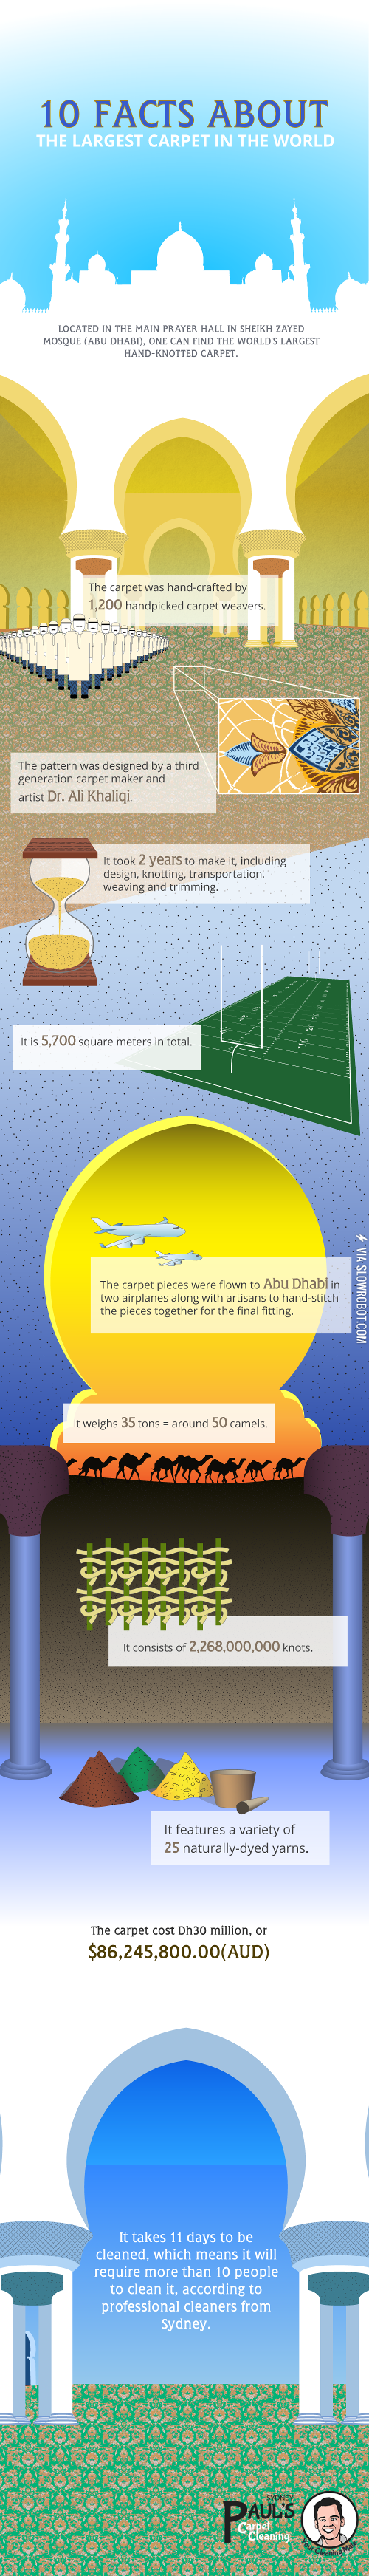 10+Facts+About+the+Largest+Carpet+in+The+World